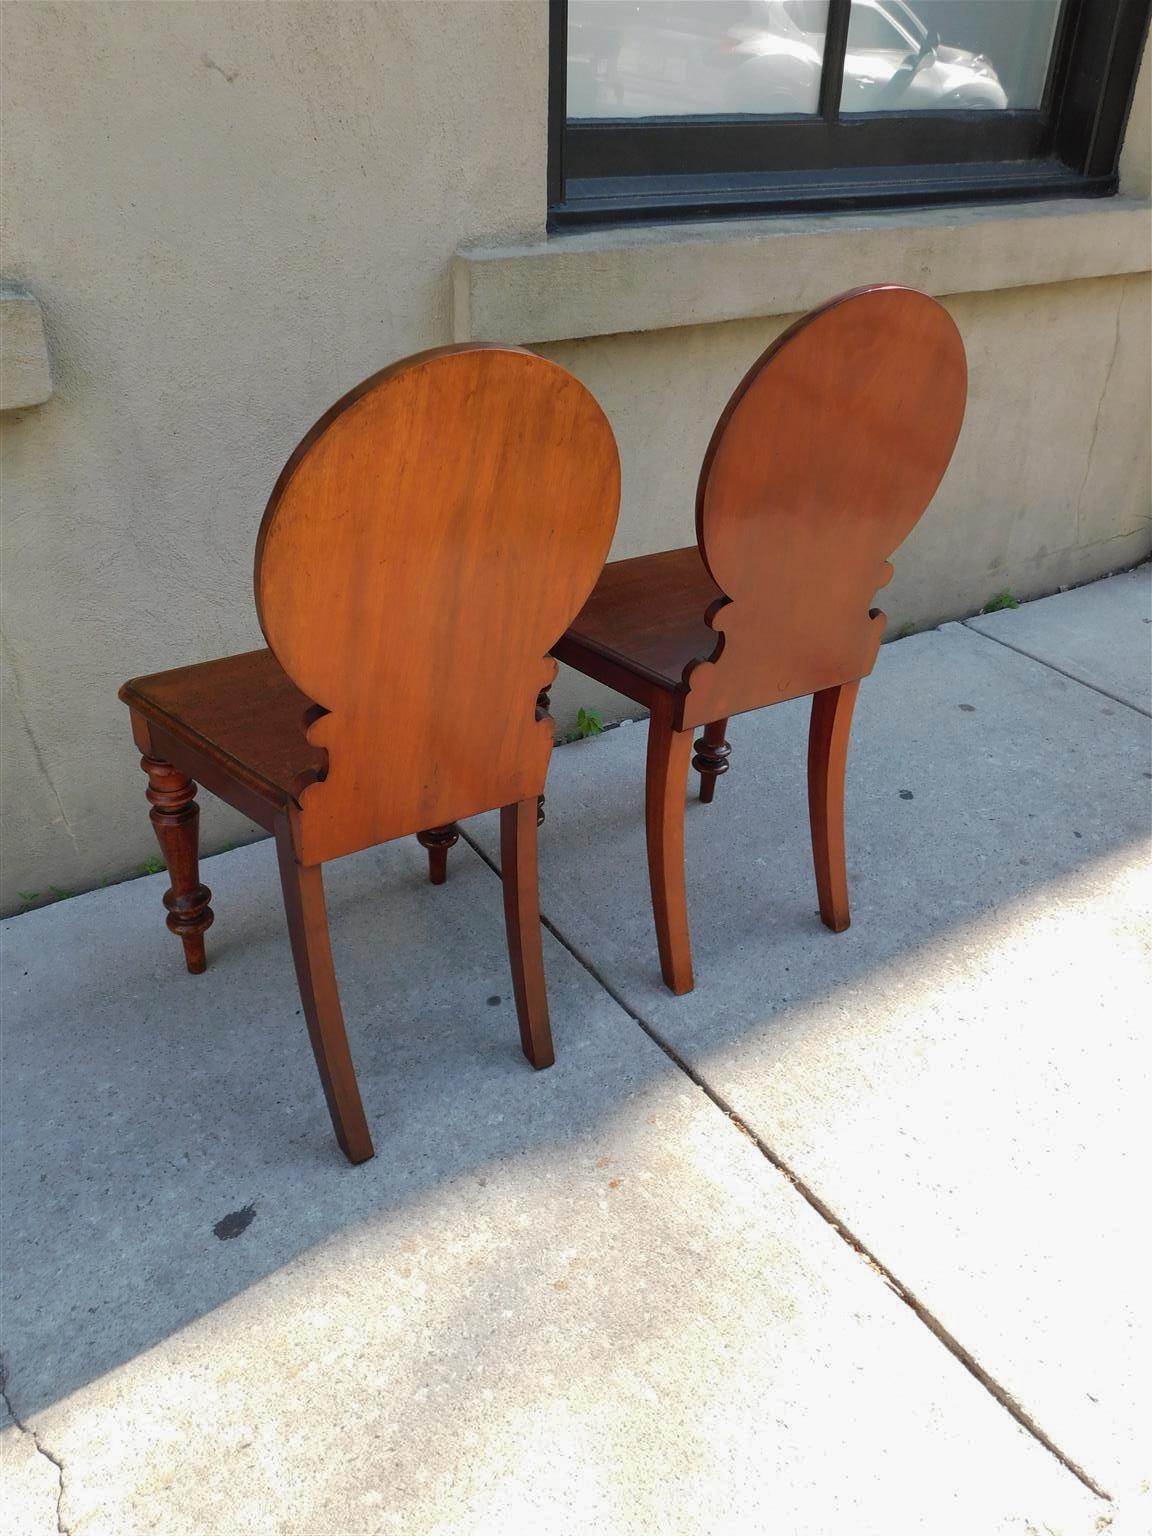 Pair of English Mahogany Crown Medallion Hall Chairs with Turned Legs, C. 1840 For Sale 1